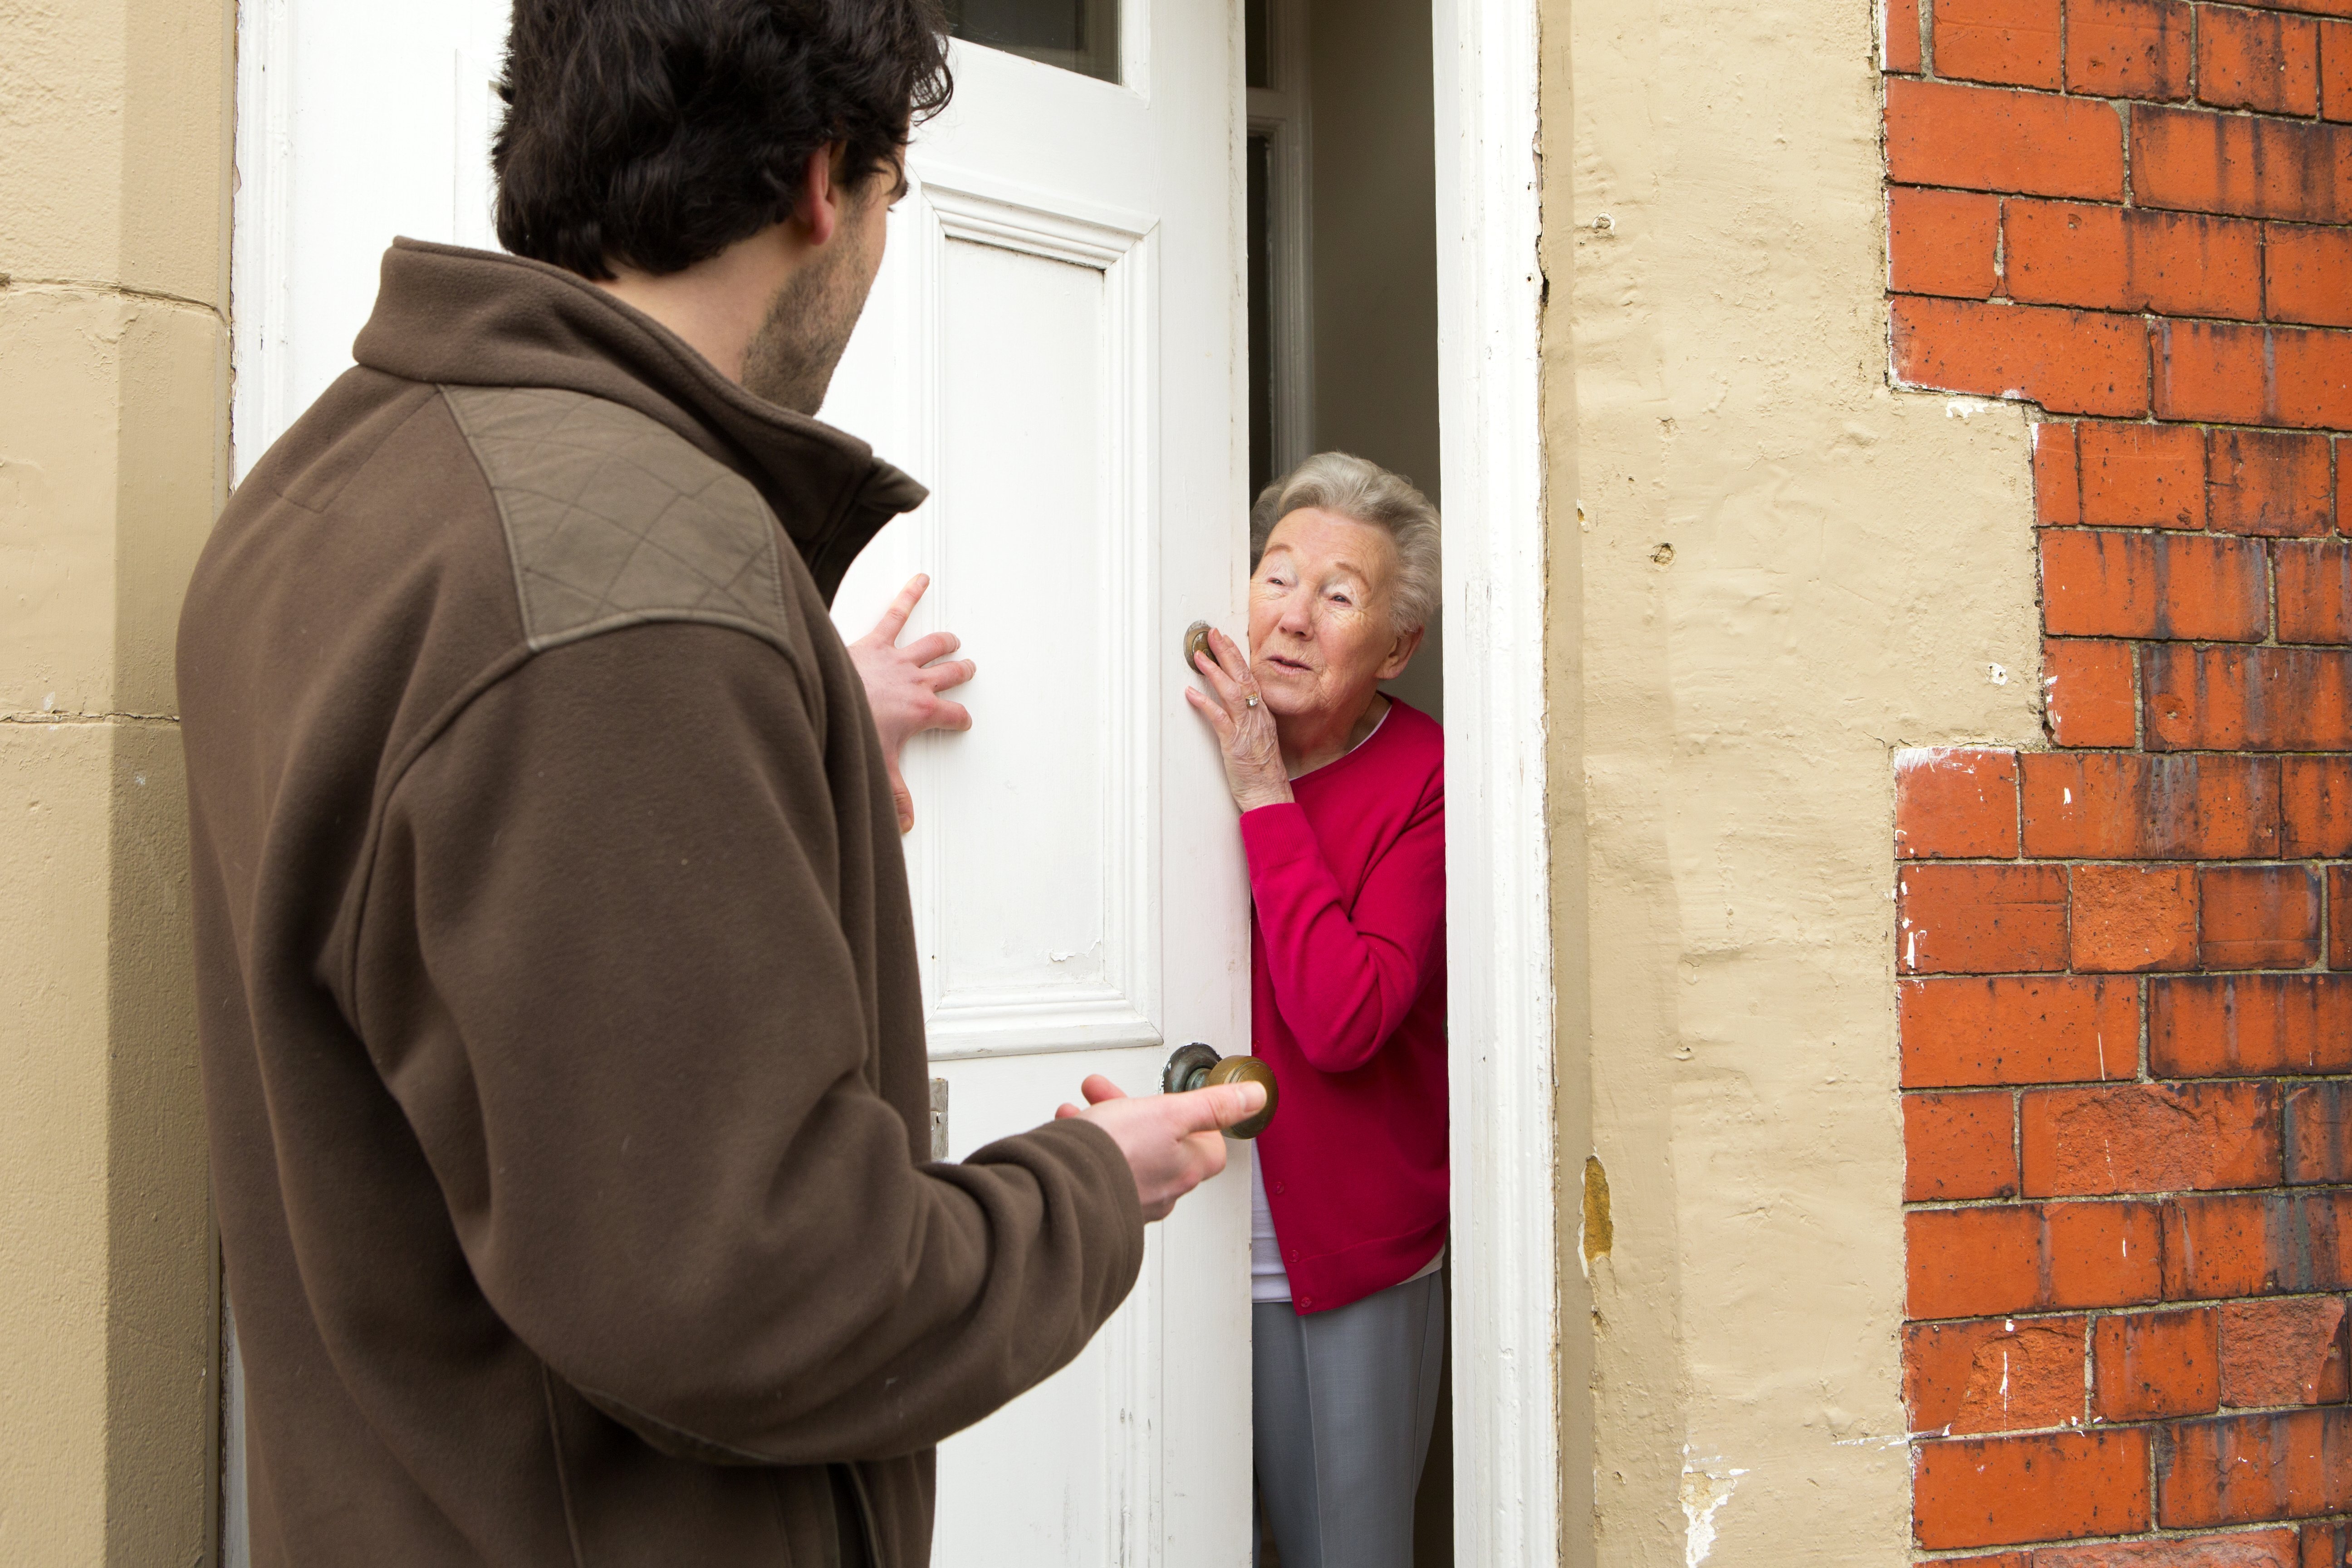 A horizontal image of a male door salesman putting an older lady under pressure to buy.|Photo: Getty Images